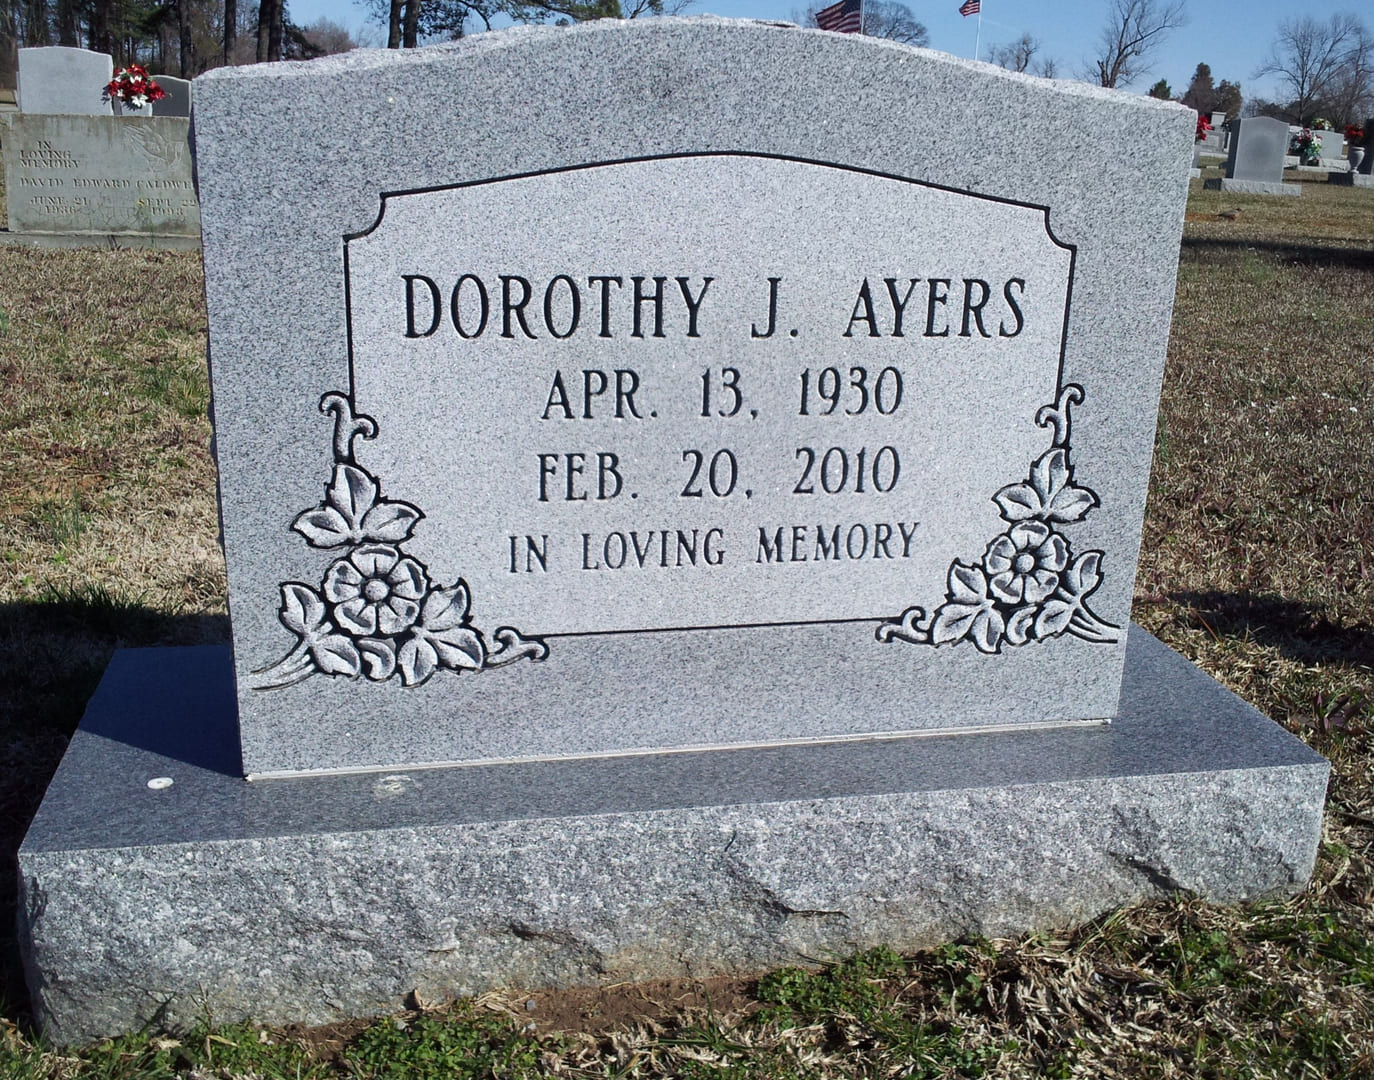 A memorial slab for Dorothy J. Ayers at the graveyard